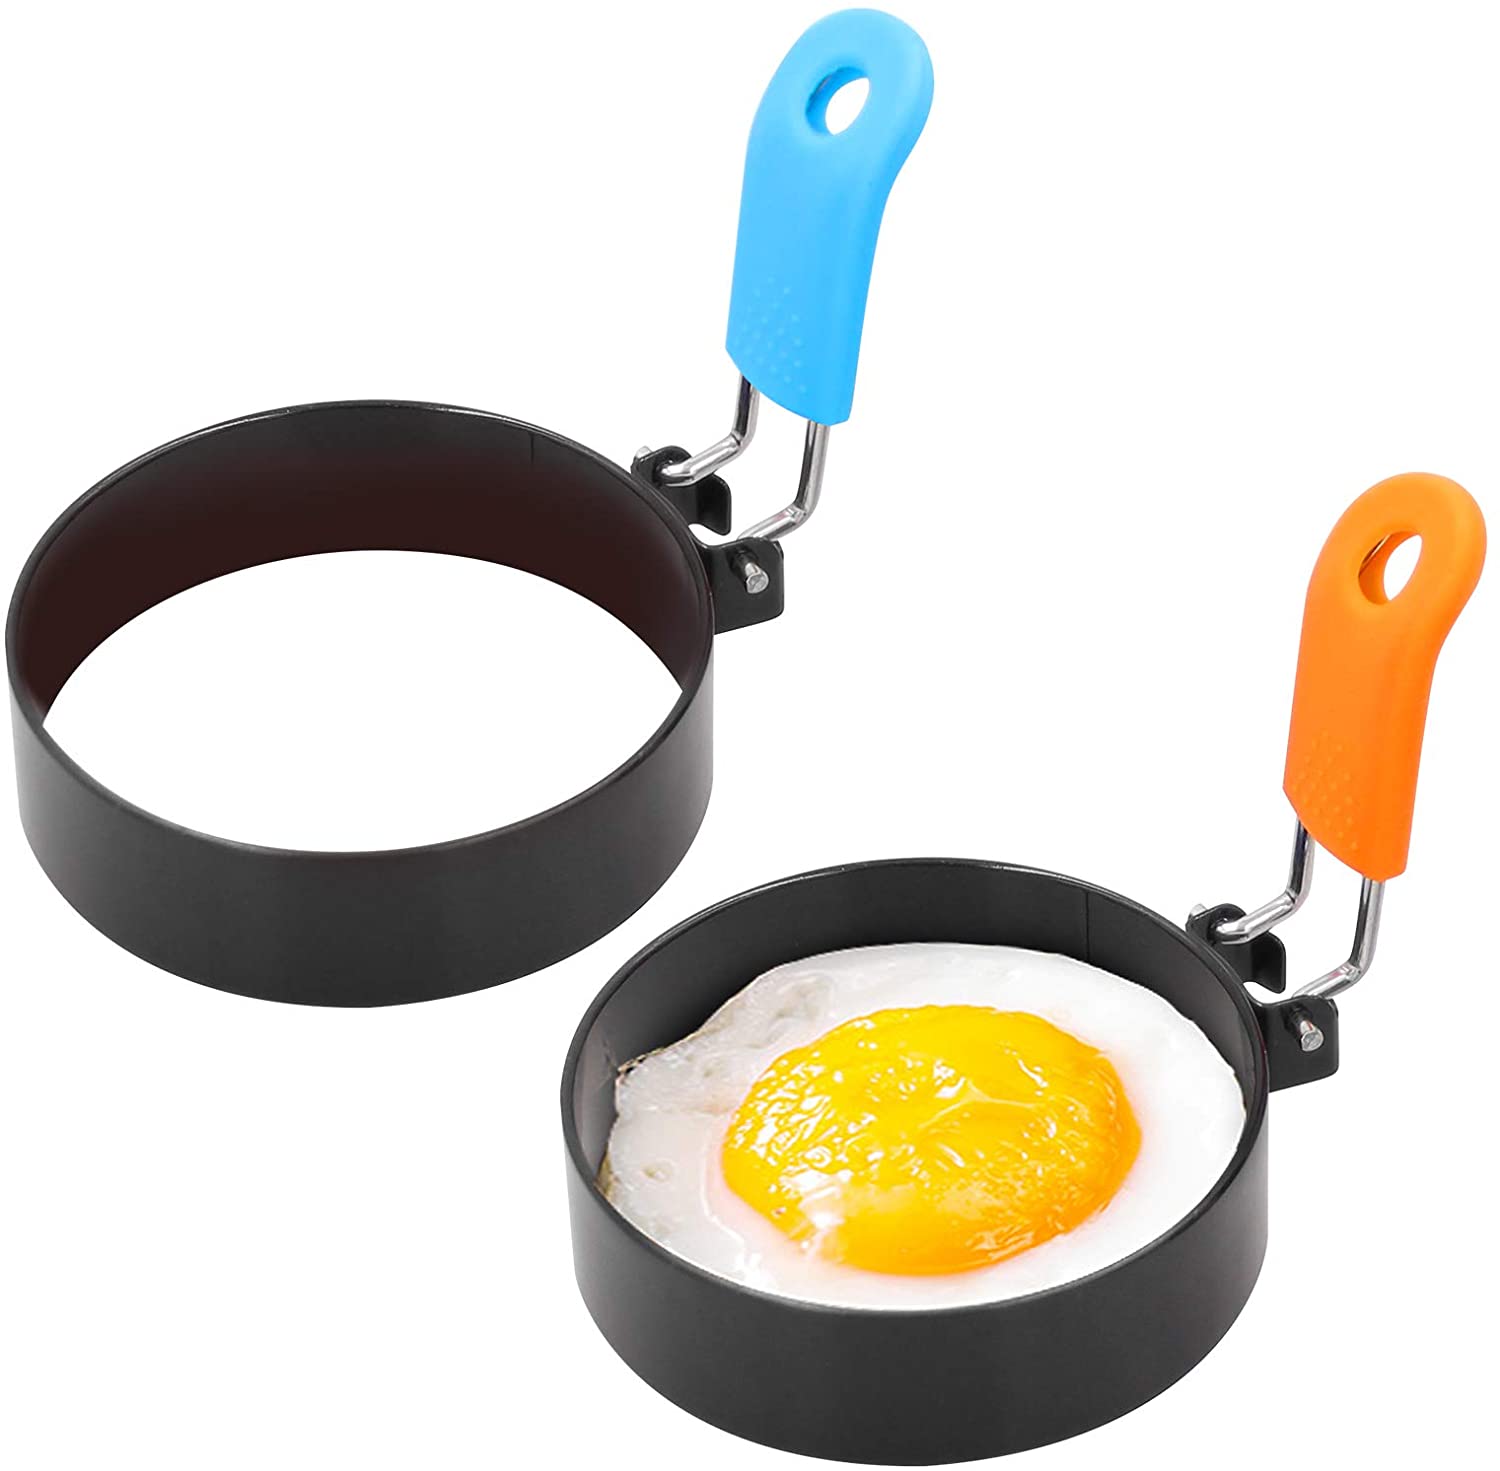 5PCS Egg Ring Stainless Steel Tool Round Omelette Mold for Frying Muffins Pancake Sandwiches